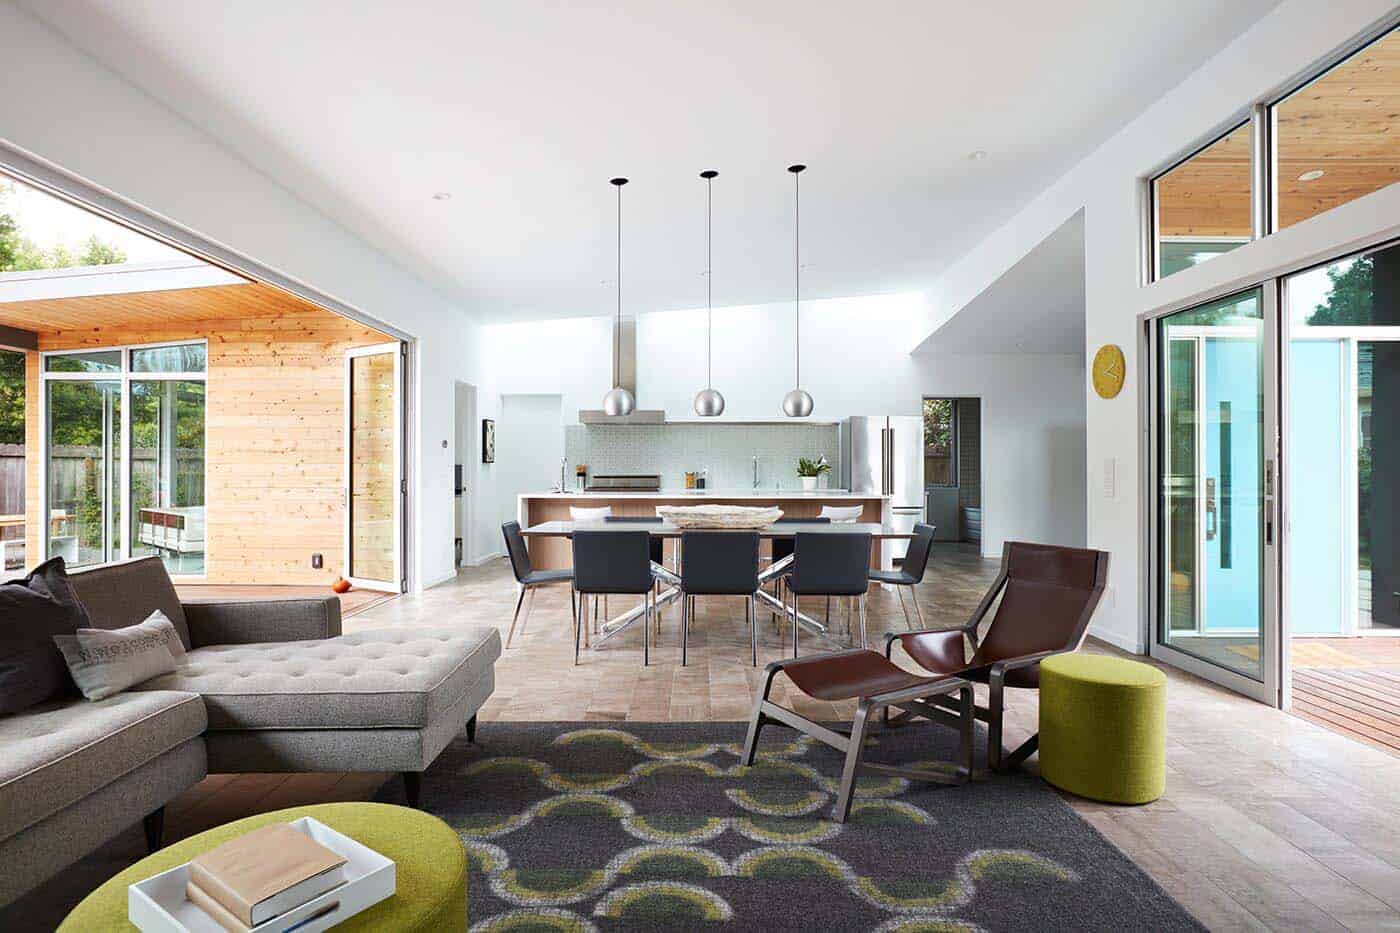 Mid-century modern dwelling in California gets flawless remodel